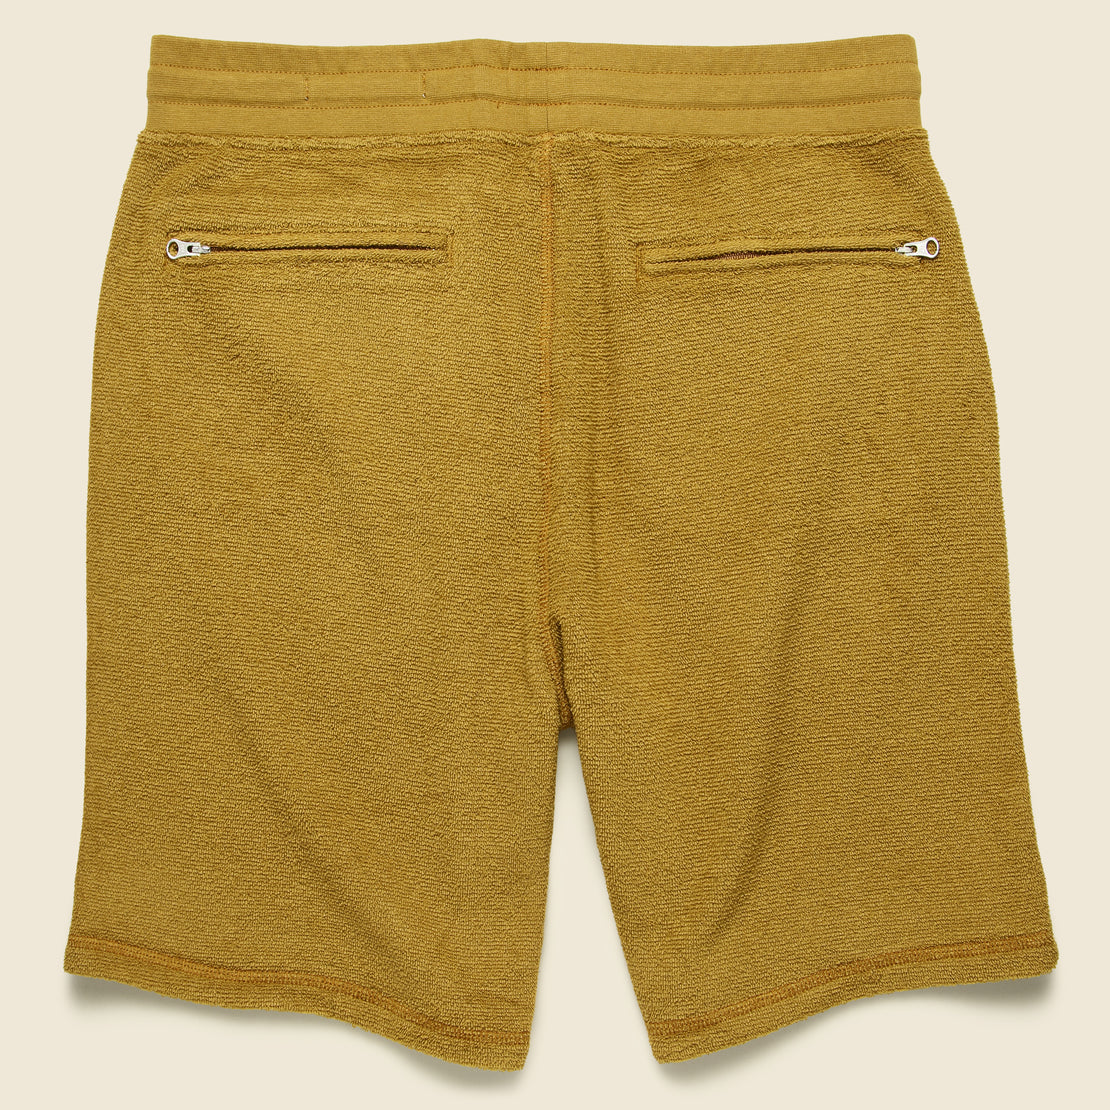 Hightide Sweatshort - Curry - Outerknown - STAG Provisions - Shorts - Lounge